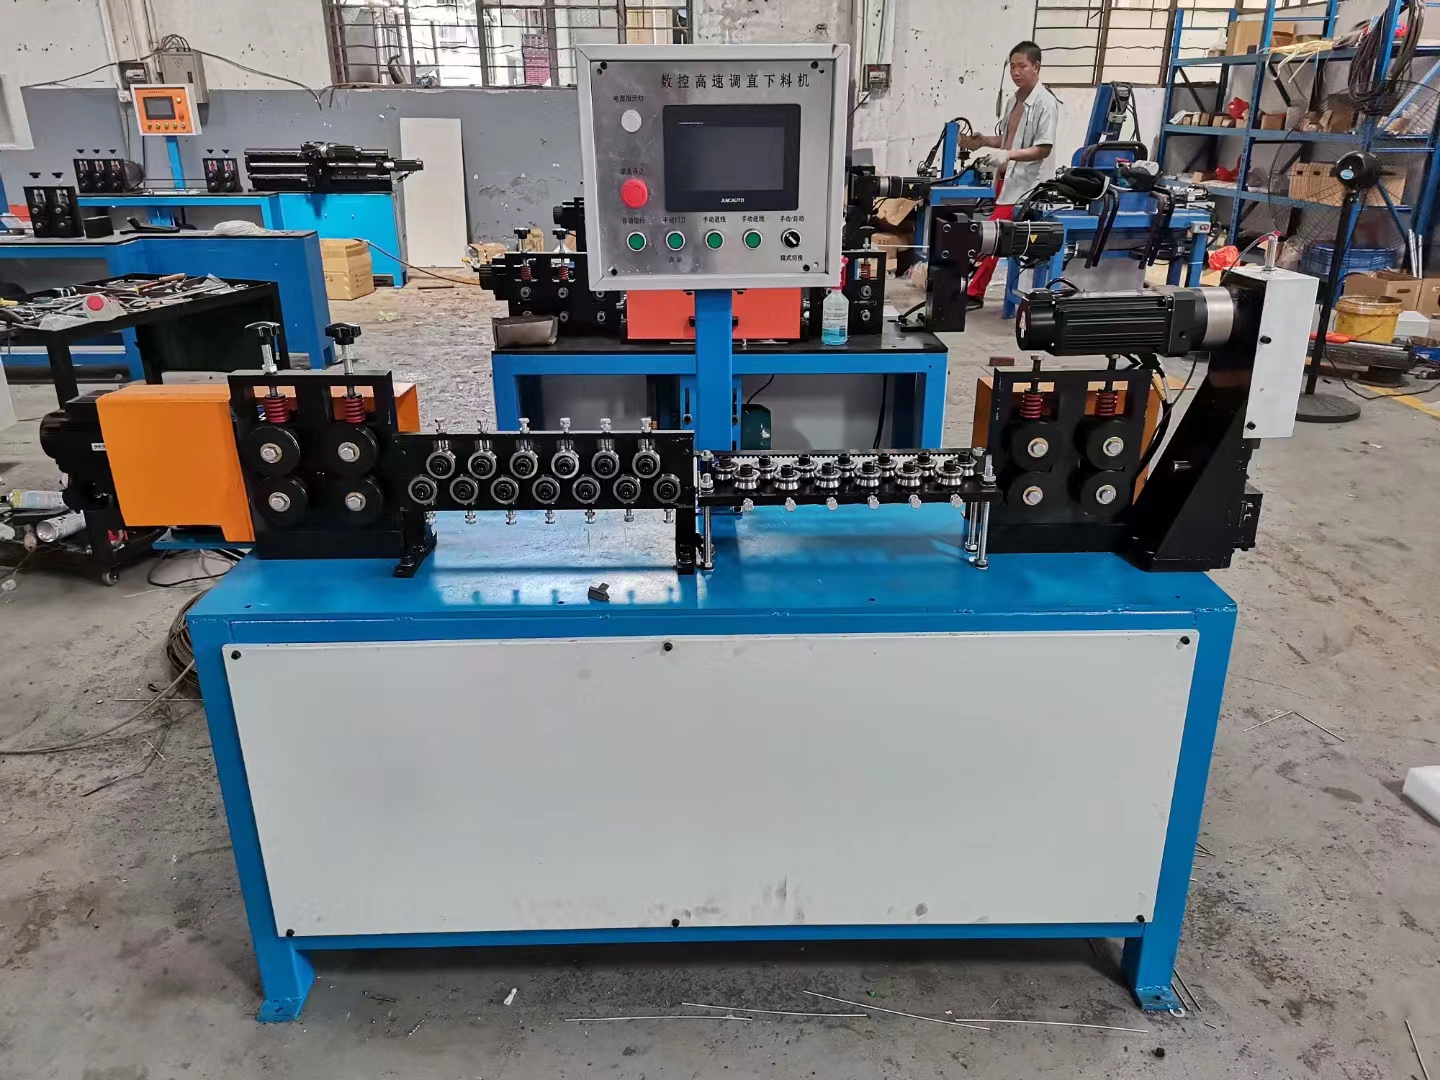 wire straightening cutting 0.5 mm 260 mm cable straightener and cutter fast machines 20-50mm wire rod cutting straightening machine tool